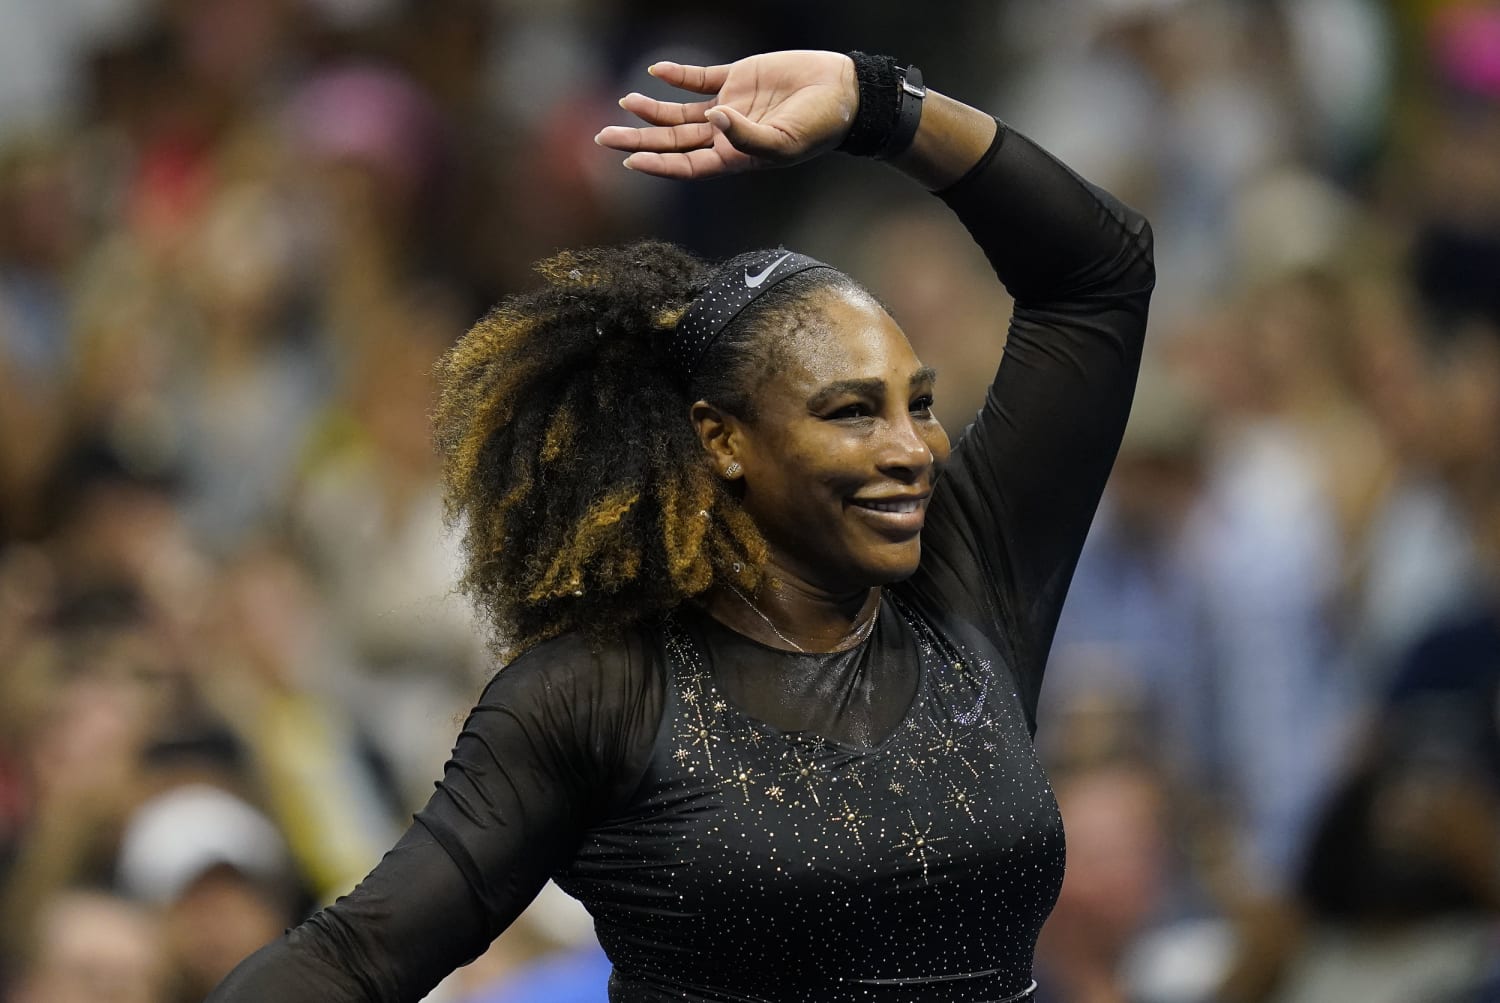 Serena Williams finishes 27-year career with iconic US Open performance